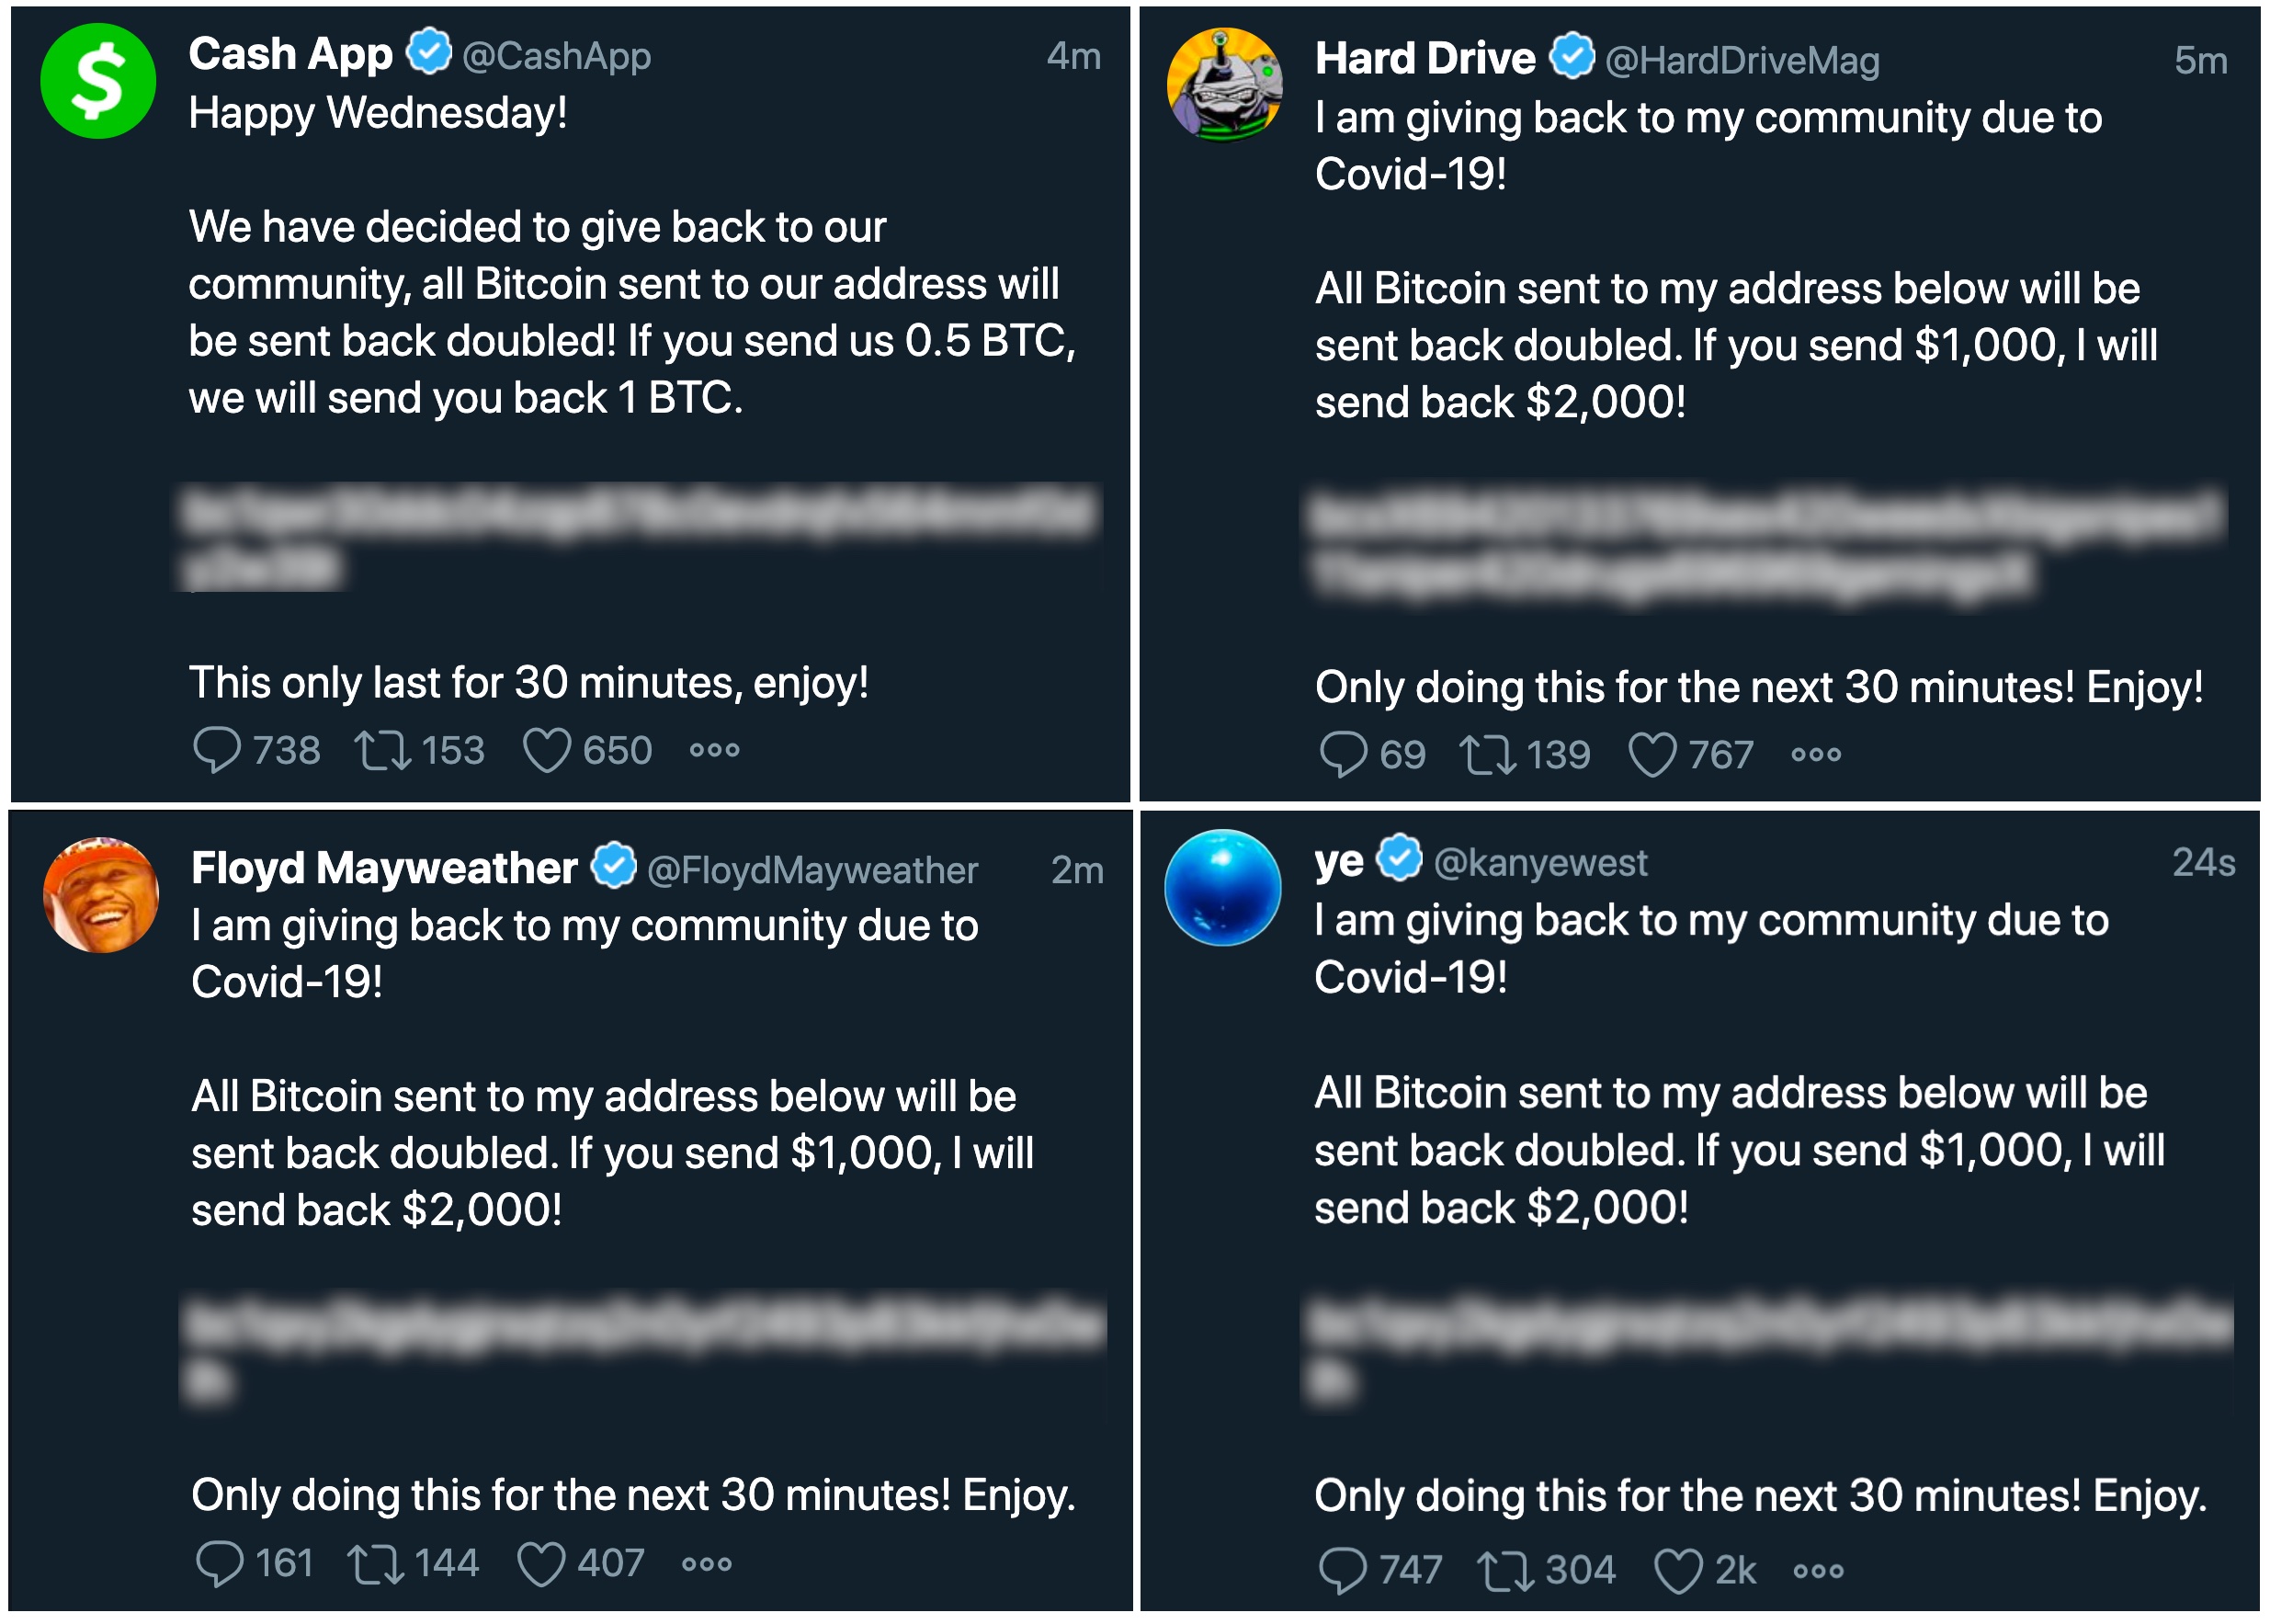 Several screenshots showing the tweets that were posted during the 2020 Twitter hack